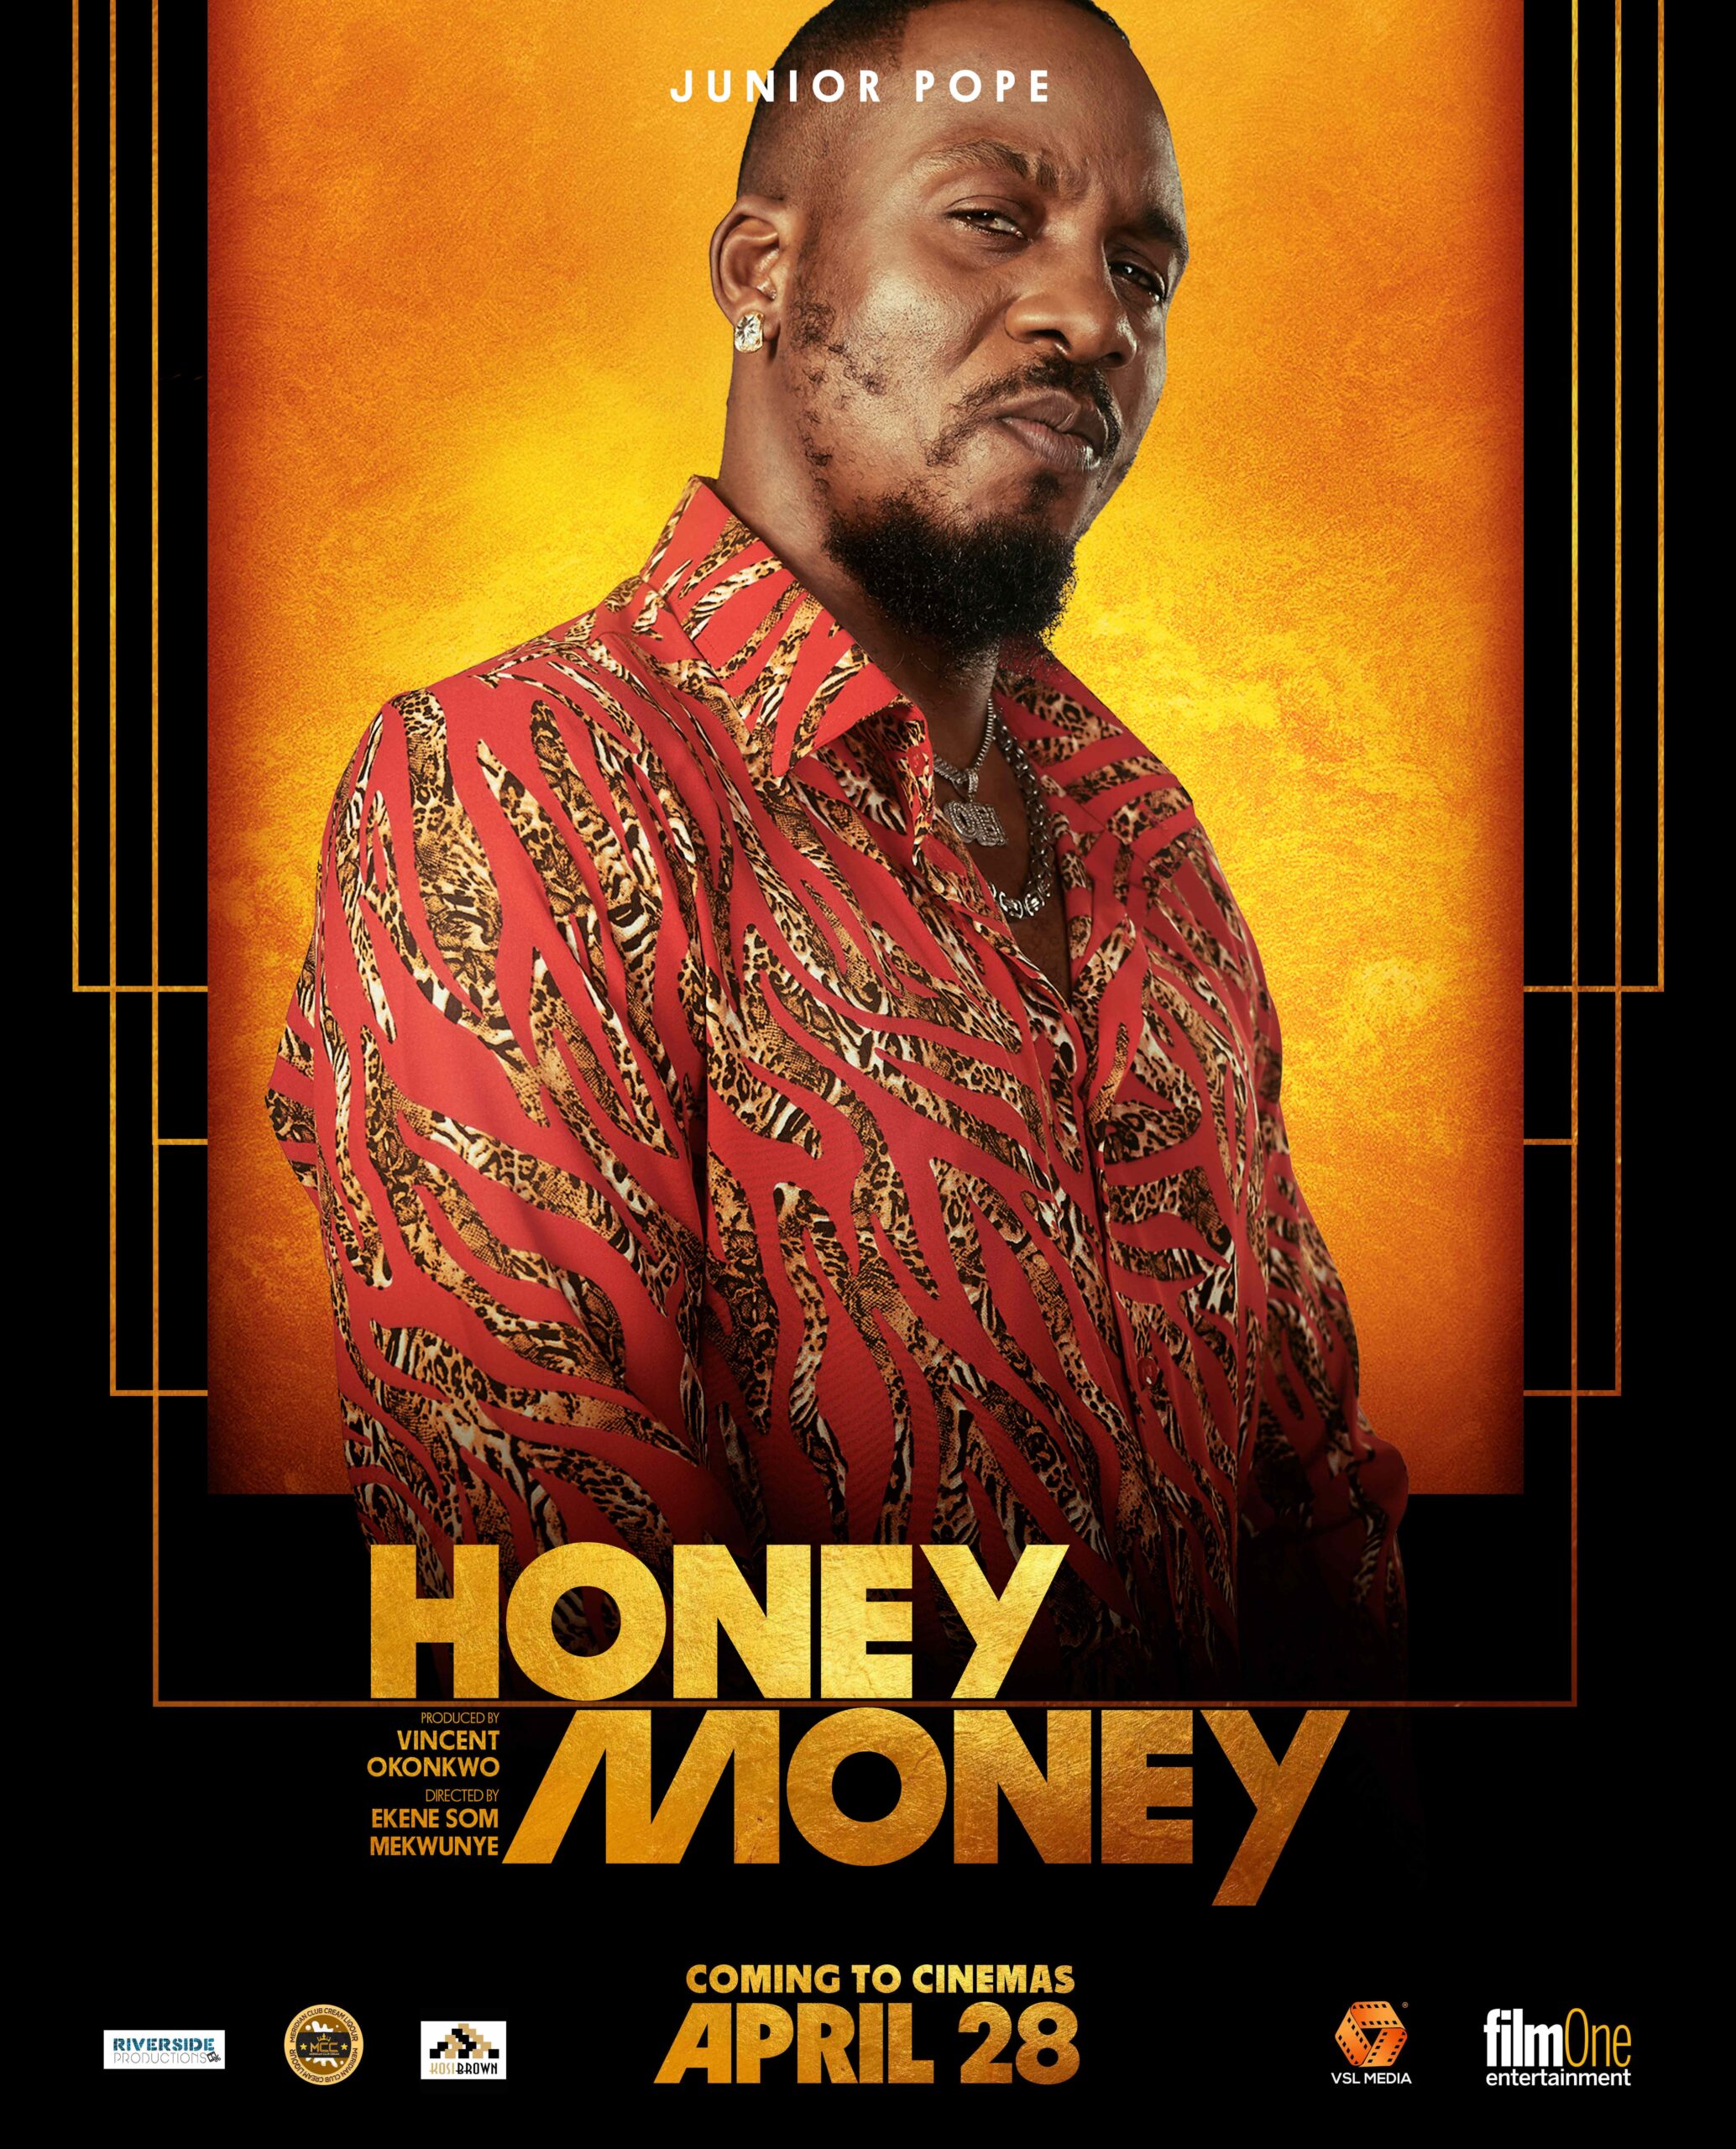 Character poster JUNIOR Blk  scaled - New "Honey Money" Posters Reveal Closer Character First Looks